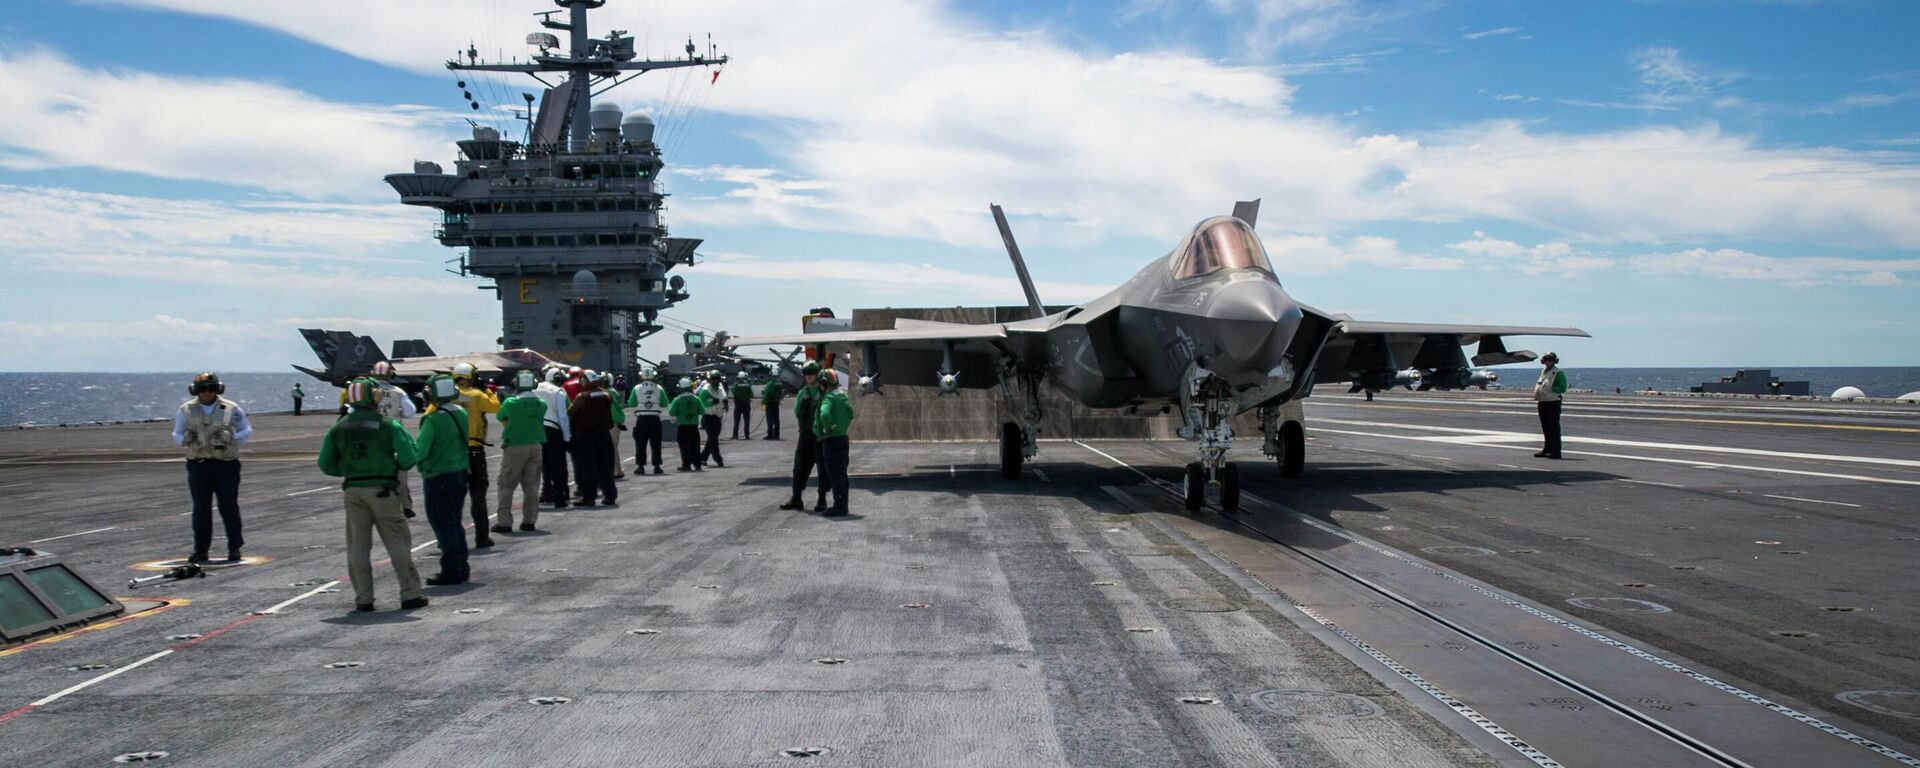 An F-35C Lightning II carrier variant, assigned to the Salty Dogs of Air Test and Evaluation Squadron (VX) 23, waits to launch on the flight deck of the aircraft carrier USS George Washington (CVN 73). VX-23 is conducting its third and final developmental test (DT-III) phase aboard George Washington in the Atlantic Ocean. The F-35C is expected to be Fleet operational in 2018.  - Sputnik International, 1920, 03.05.2022